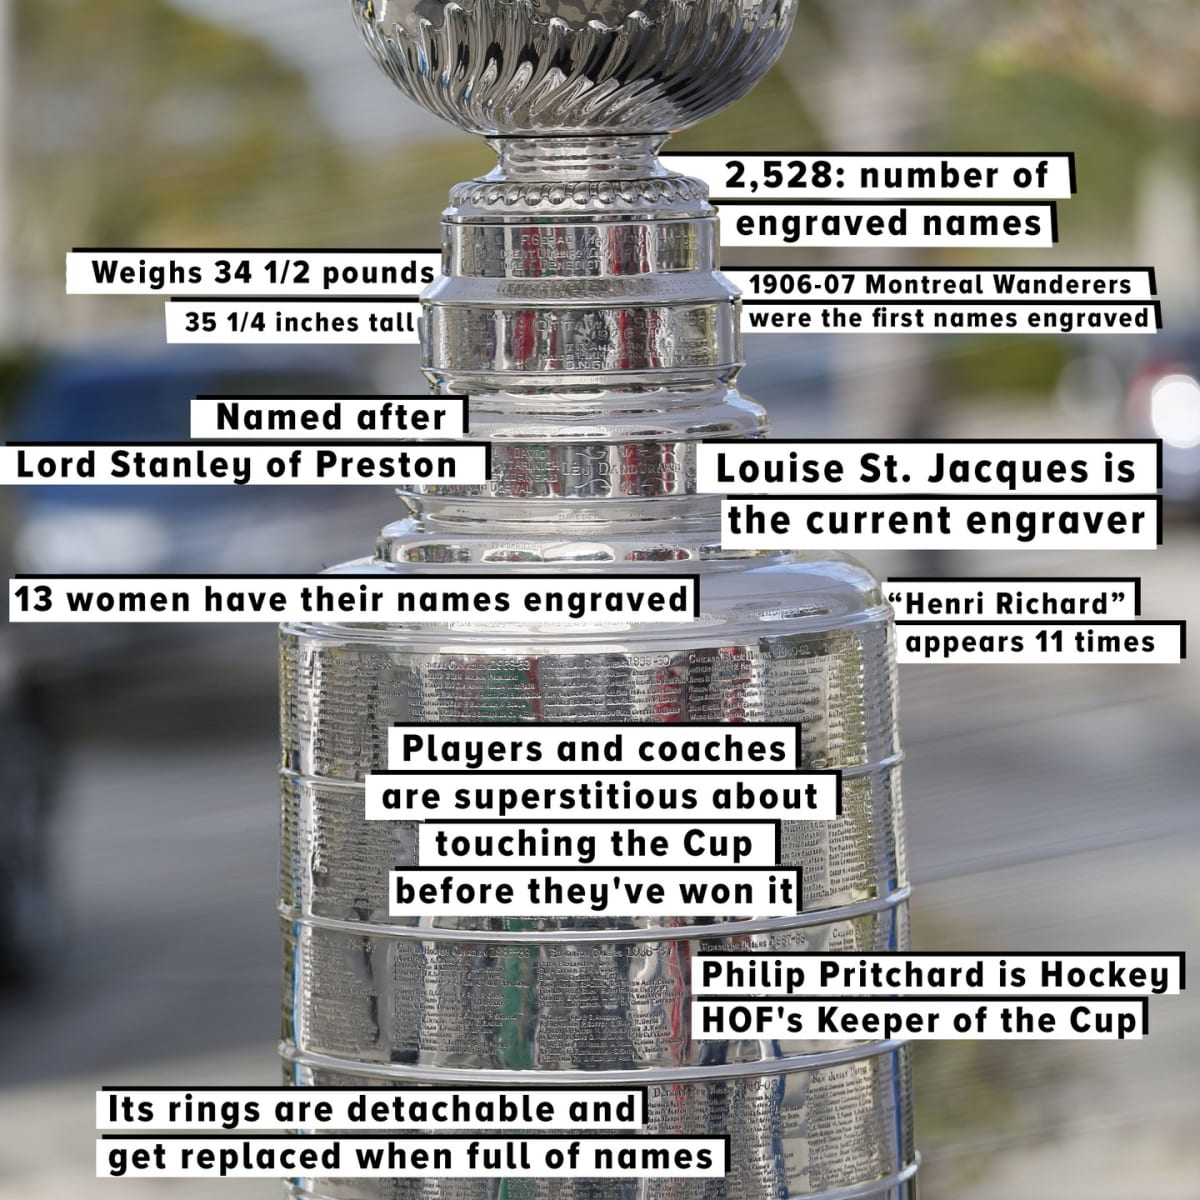 https://images.saymedia-content.com/.image/ar_1:1%2Cc_fill%2Ccs_srgb%2Cfl_progressive%2Cq_auto:eco%2Cw_1200/MTgzODY5ODA3NDg0NDc4NTYx/the-stanley-cup-oldest-trophy-in-sports-in-north-america.jpg